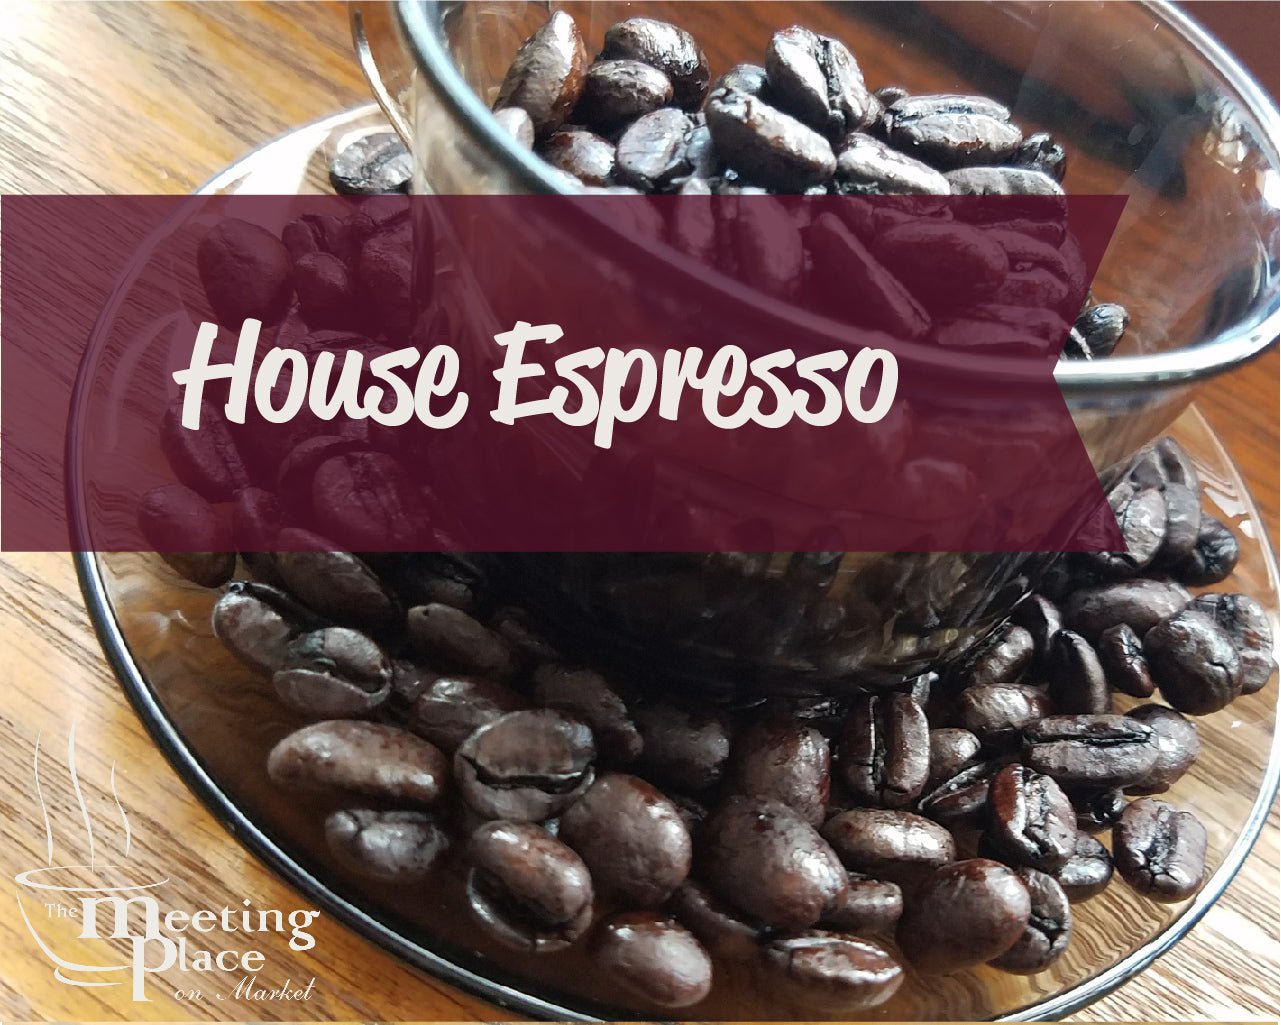 House Espressso Beans / Ground Coffee Gourmet Coffee - The Meeting Place on Market